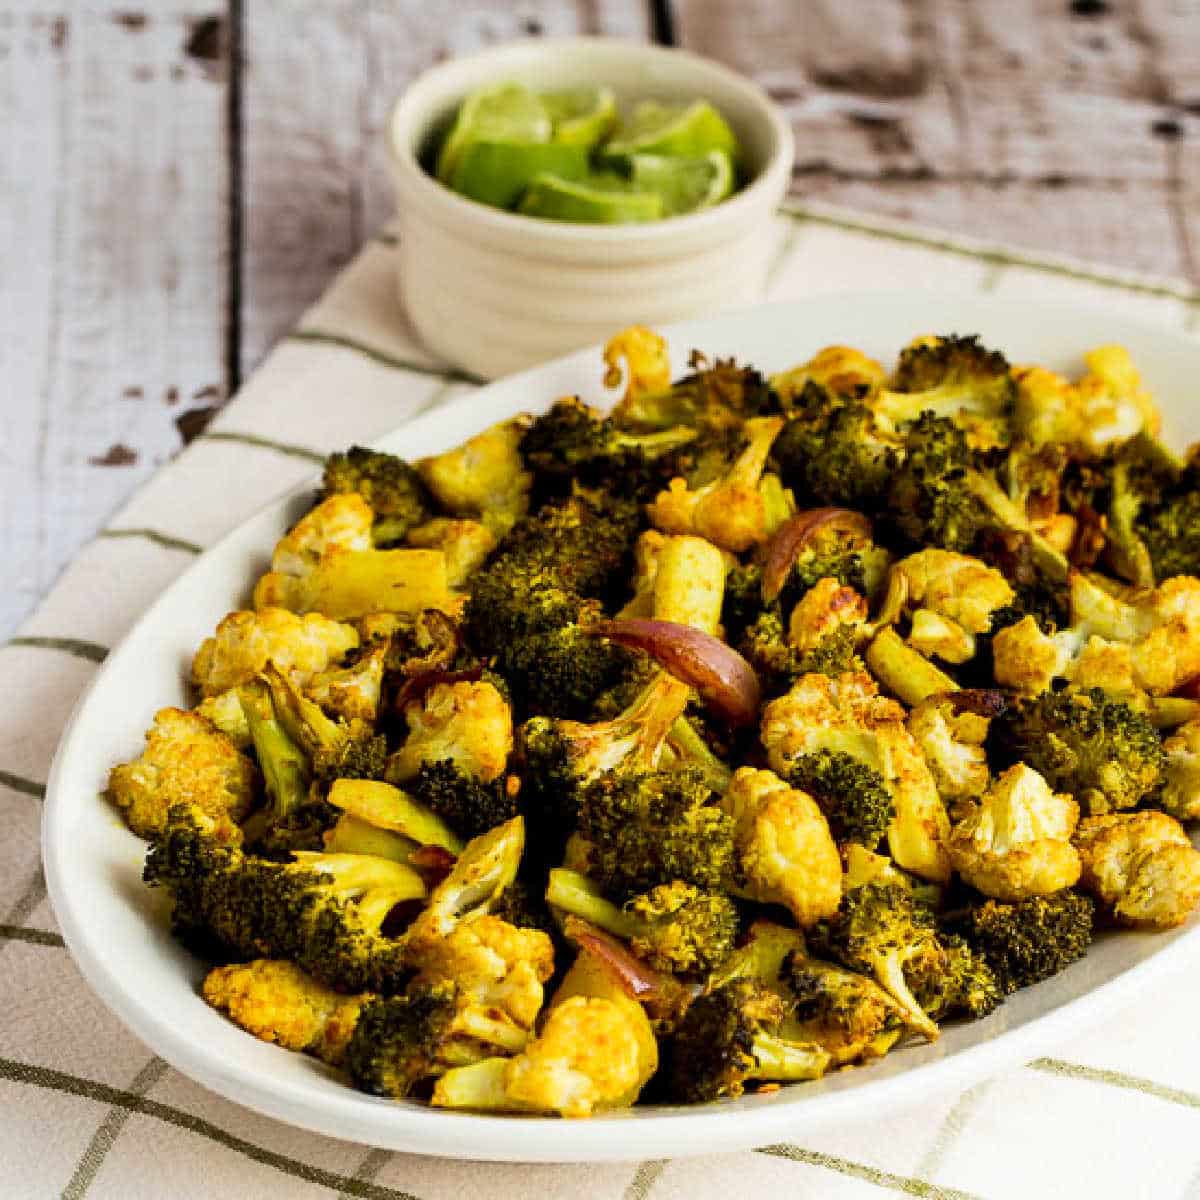 square image of Roasted Broccoli and Cauliflower shown on serving plate with limes in background